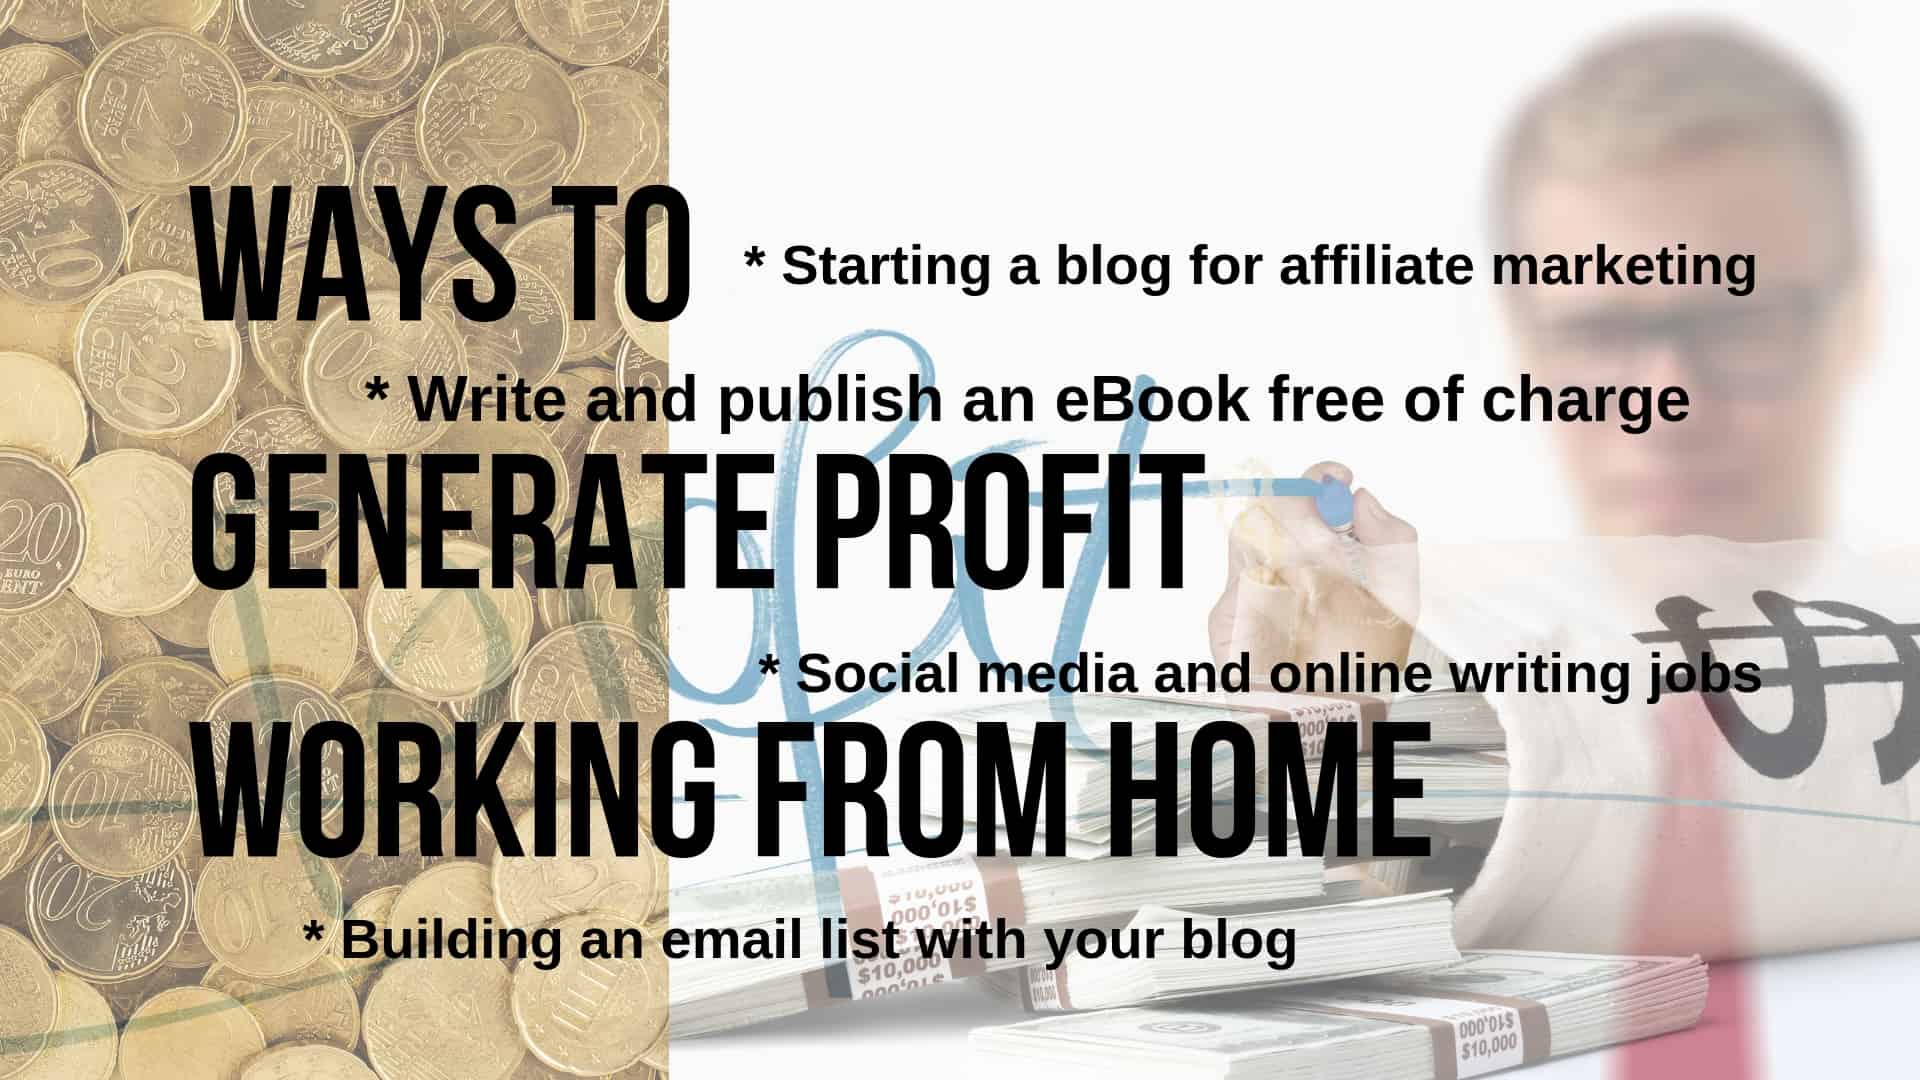 Ways to generate profit online working from home